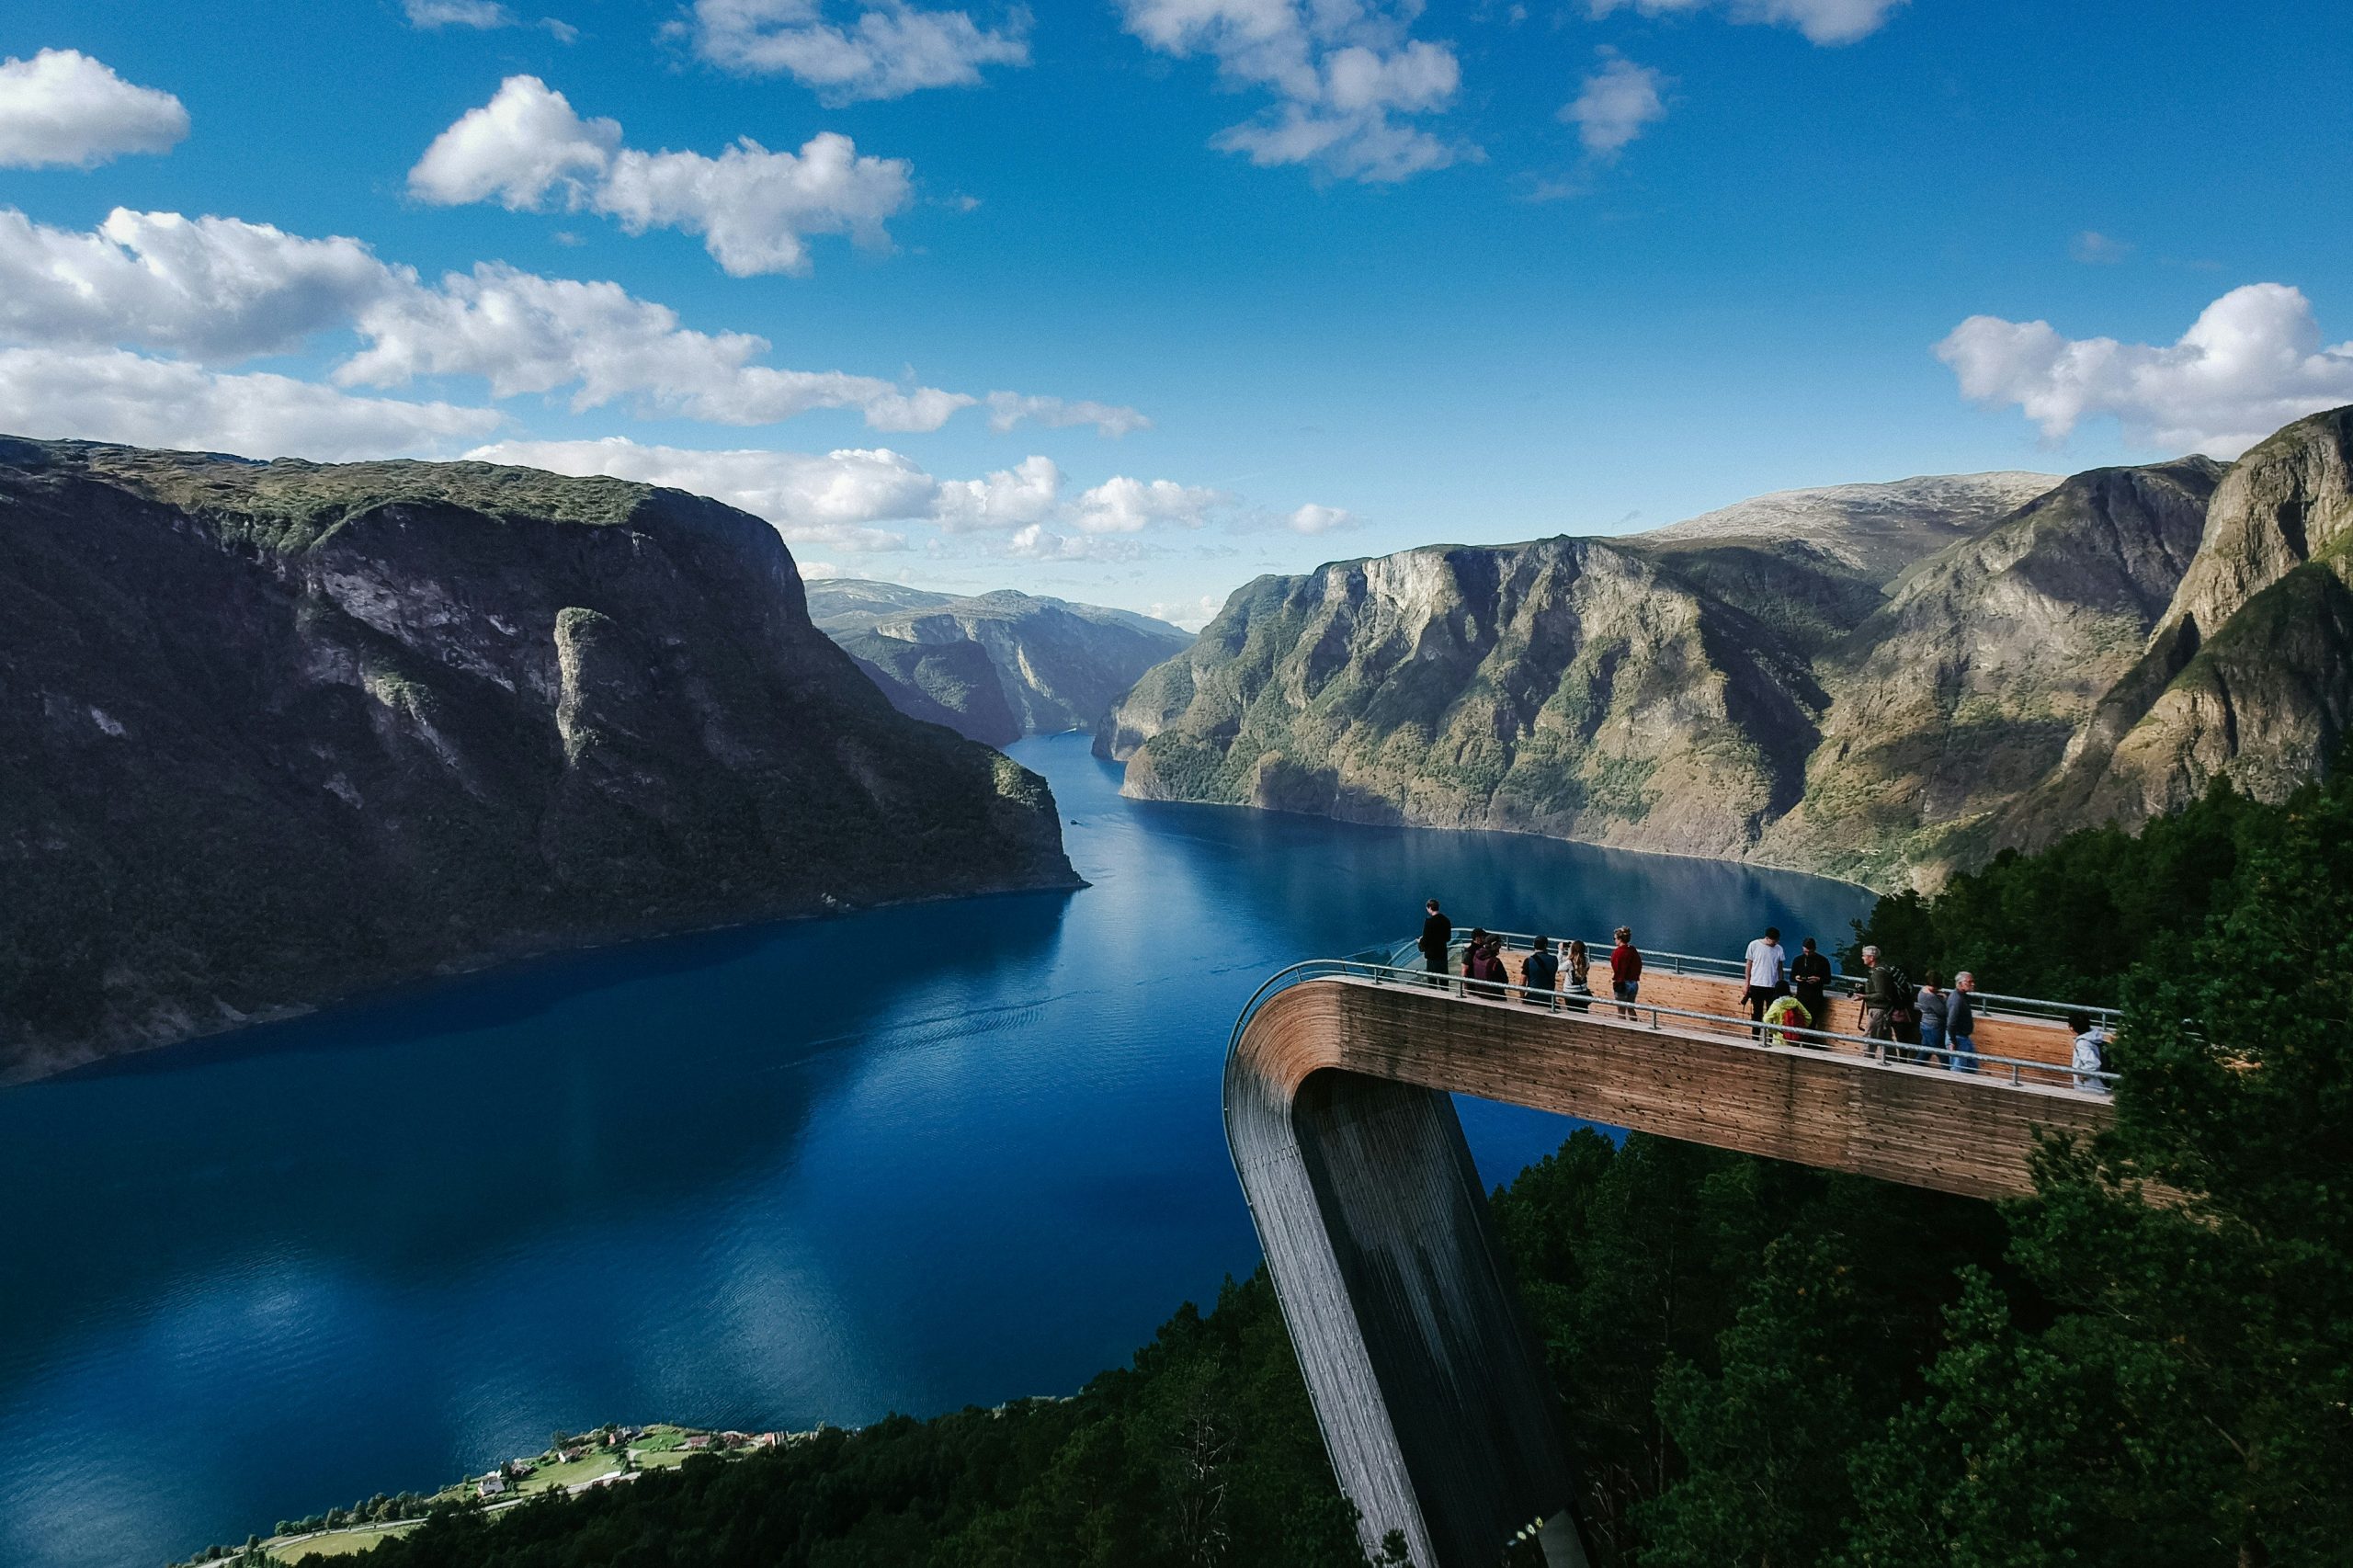 explore the breathtaking beauty of norway's fjords, where steep cliffs, crystal-clear waters, and dramatic landscapes await. discover the untouched natural wonders of this scandinavian paradise.